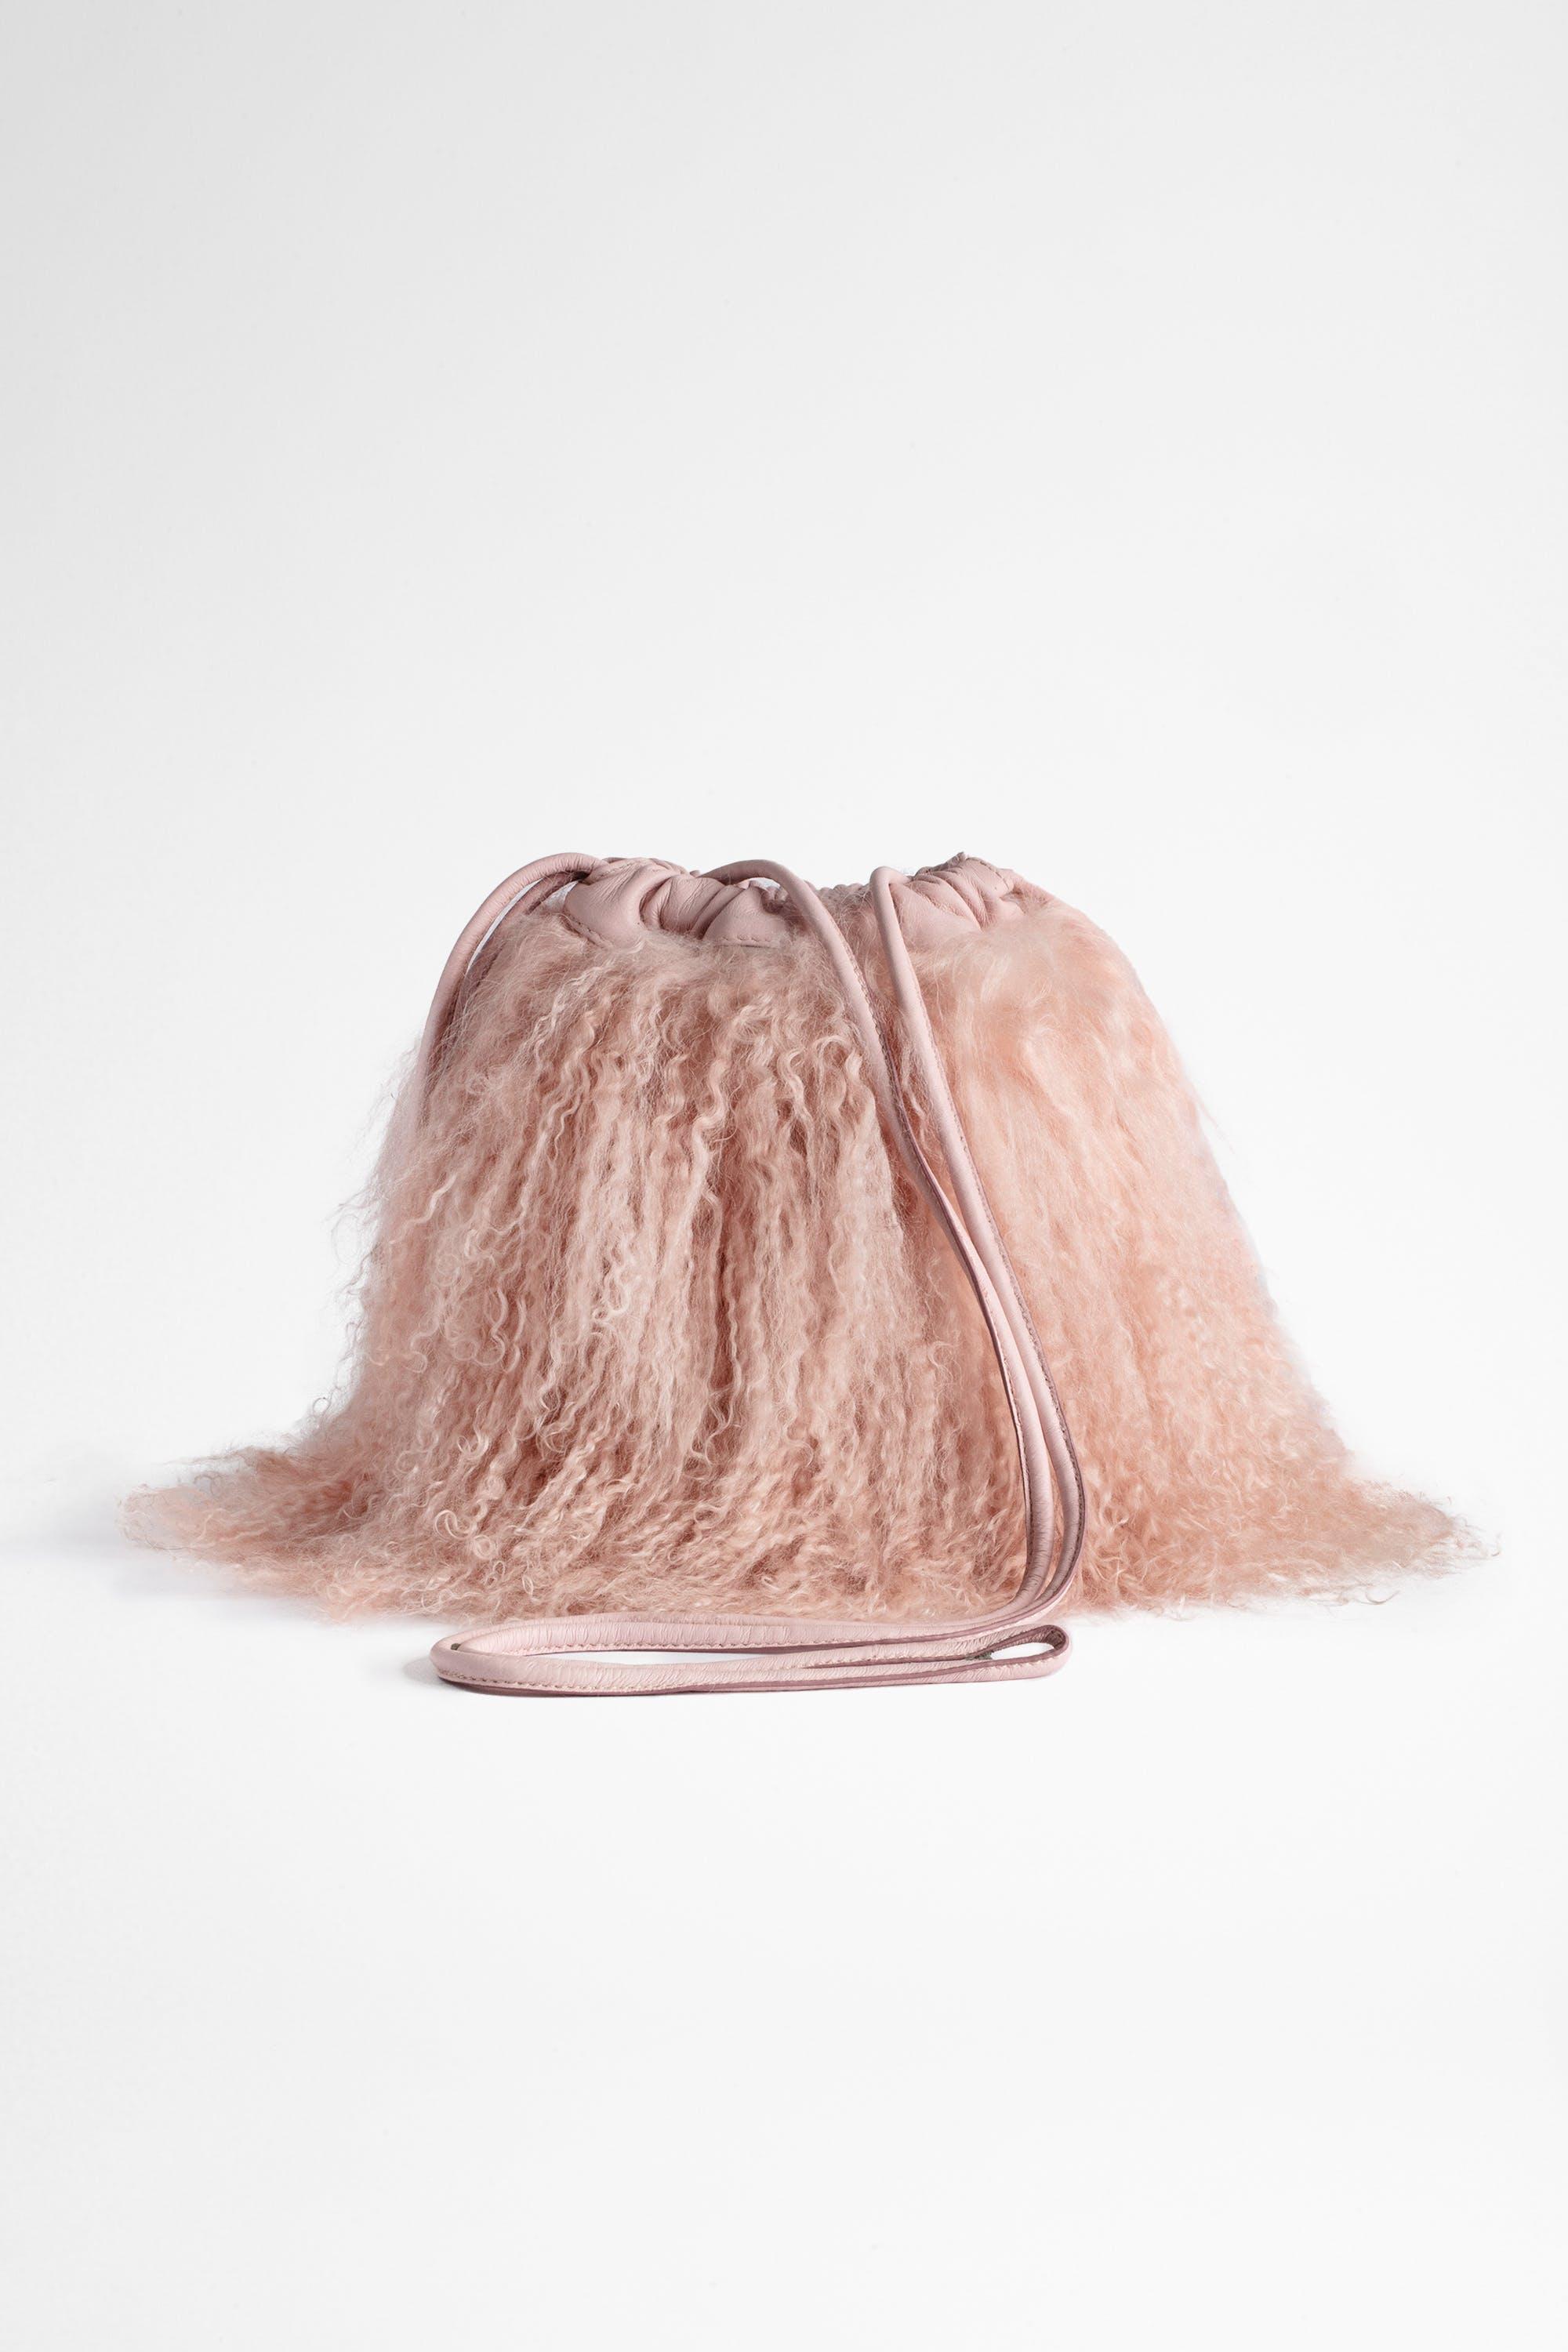 Zadig & Voltaire Rock To Go Frenzy Shearling Bag in Pink | Lyst